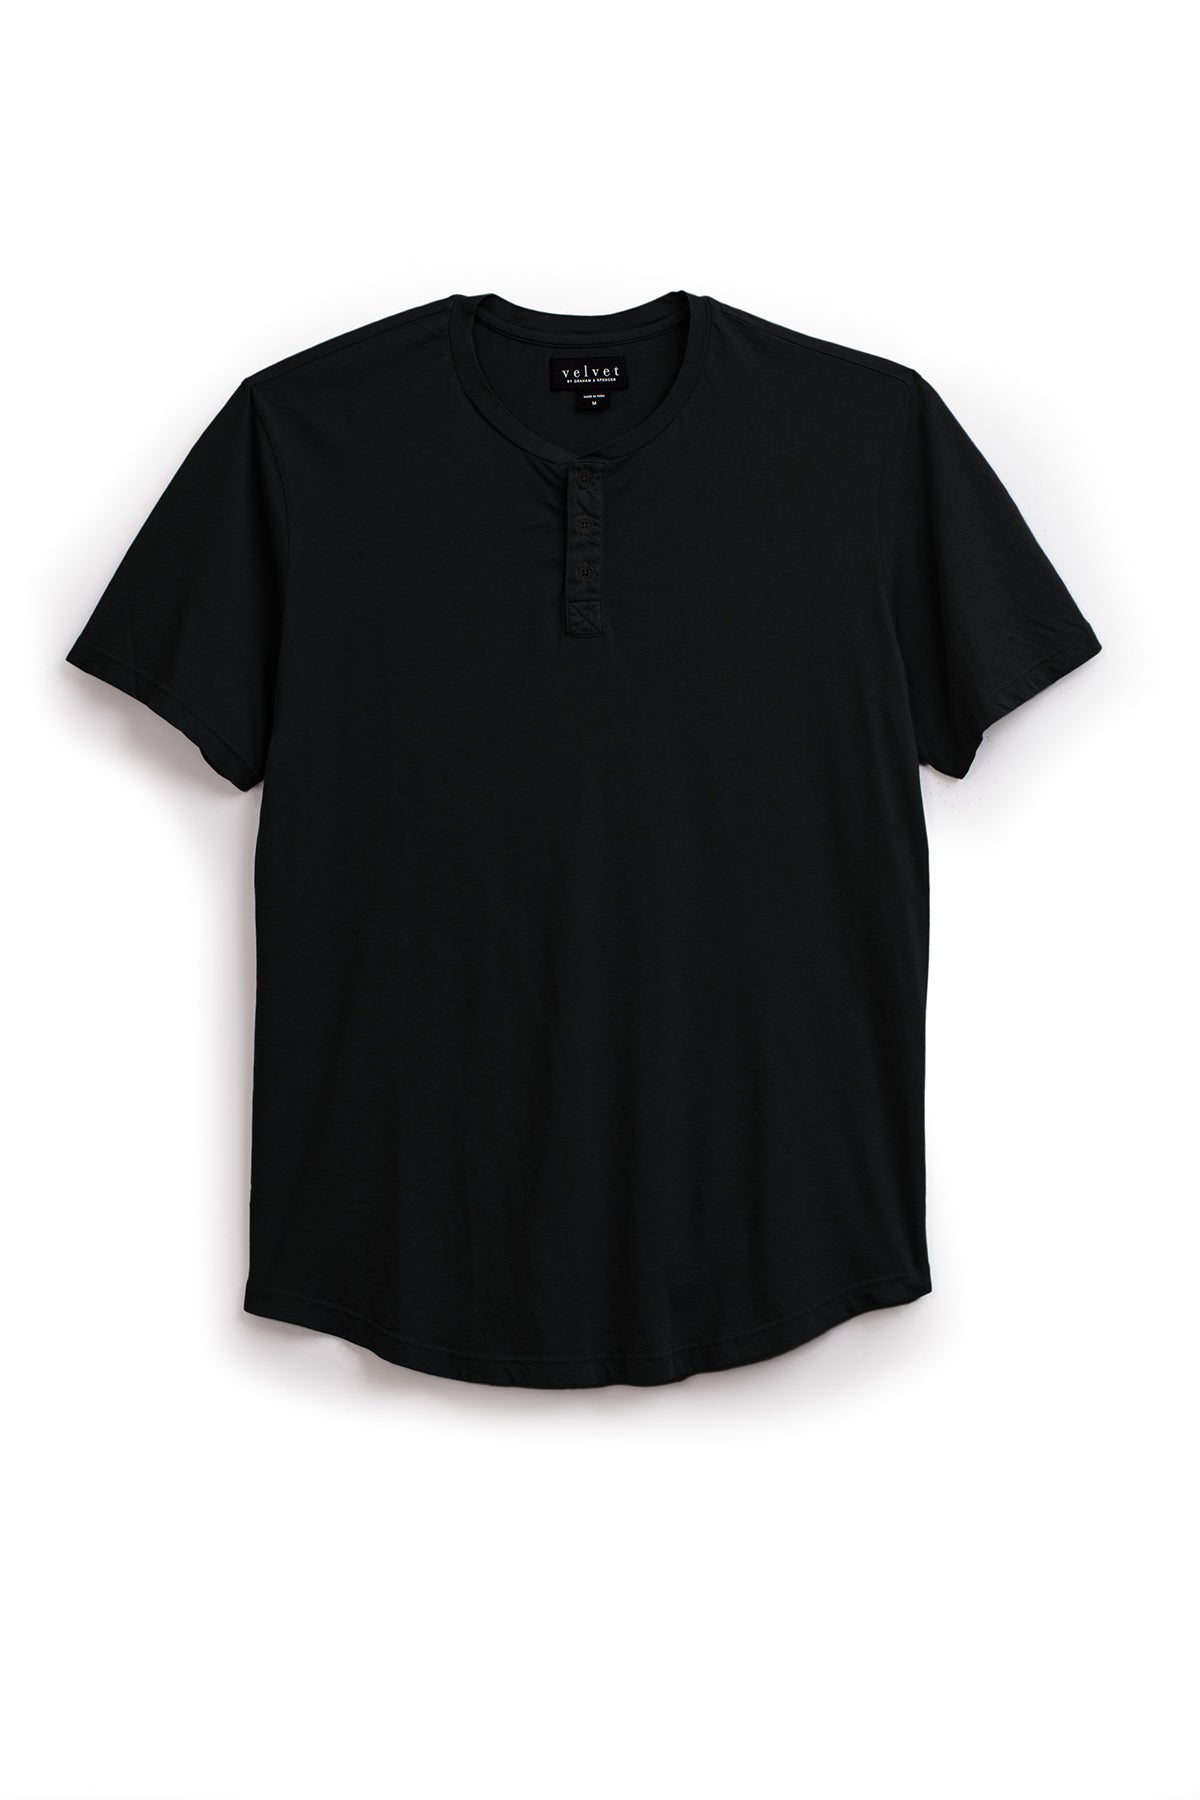   A plain black short-sleeved Fulton henley tee by Velvet by Graham & Spencer with a three-button placket and a curved hemline on a white background. 